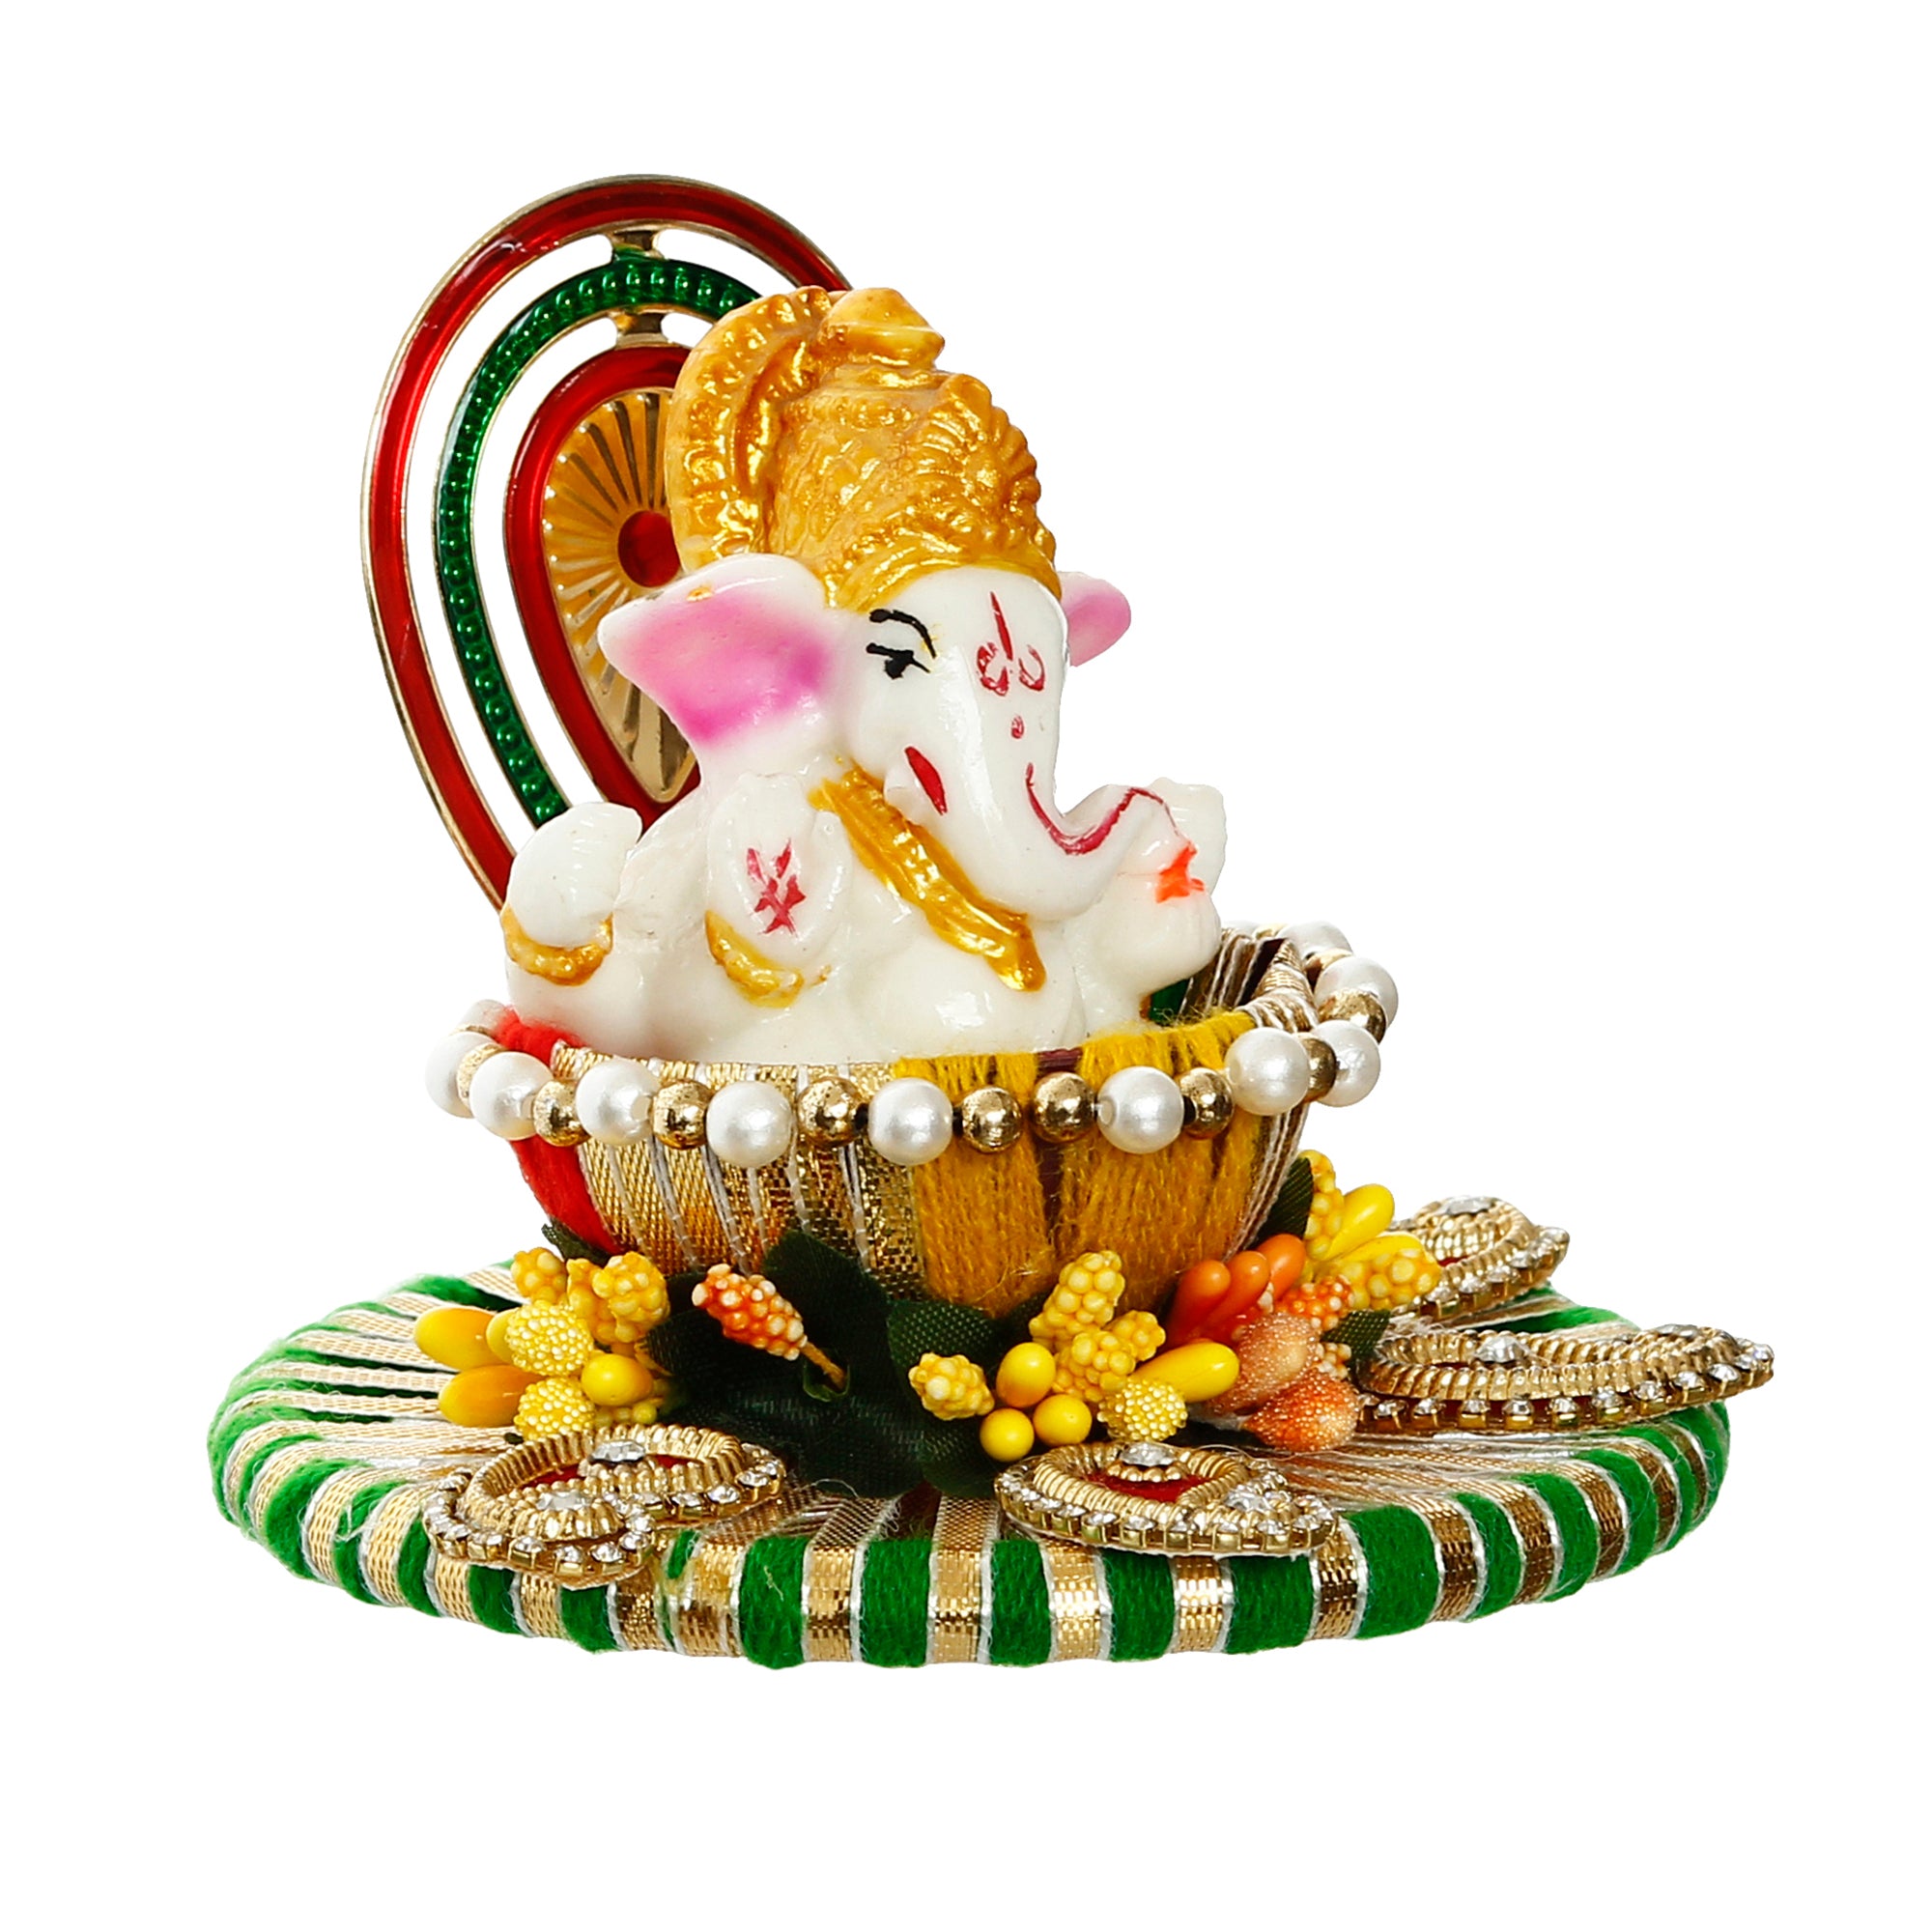 Lord Ganesha Idol on Decorative Handcrafted Singhasan for Home/Temple/Office/Car Dashboard 4